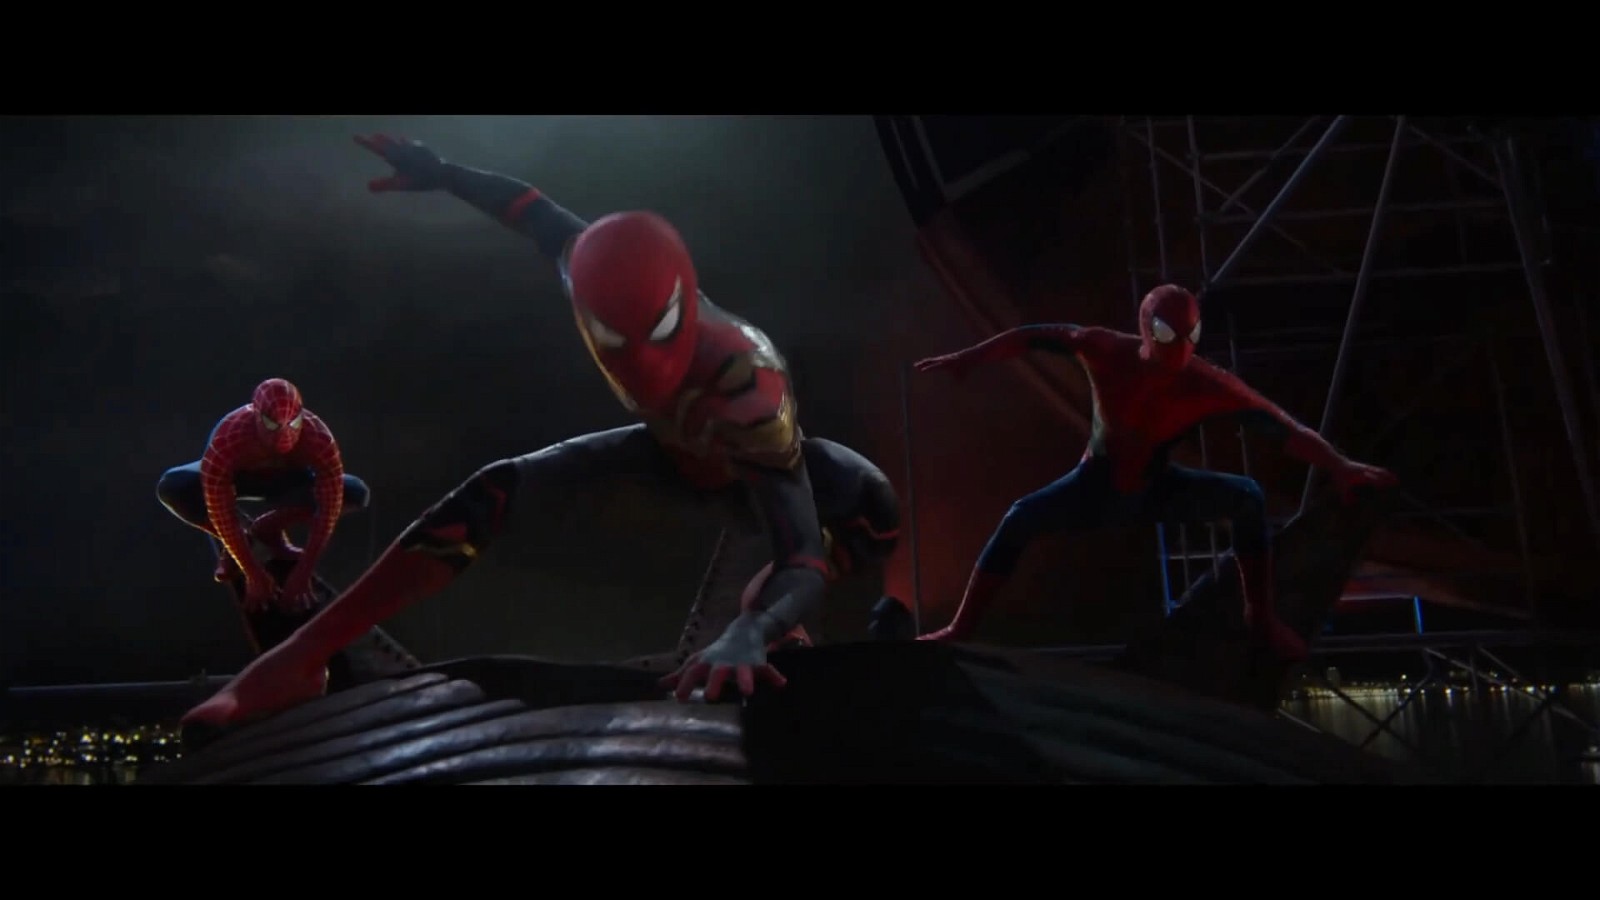 The three Spider-Man together on-screen